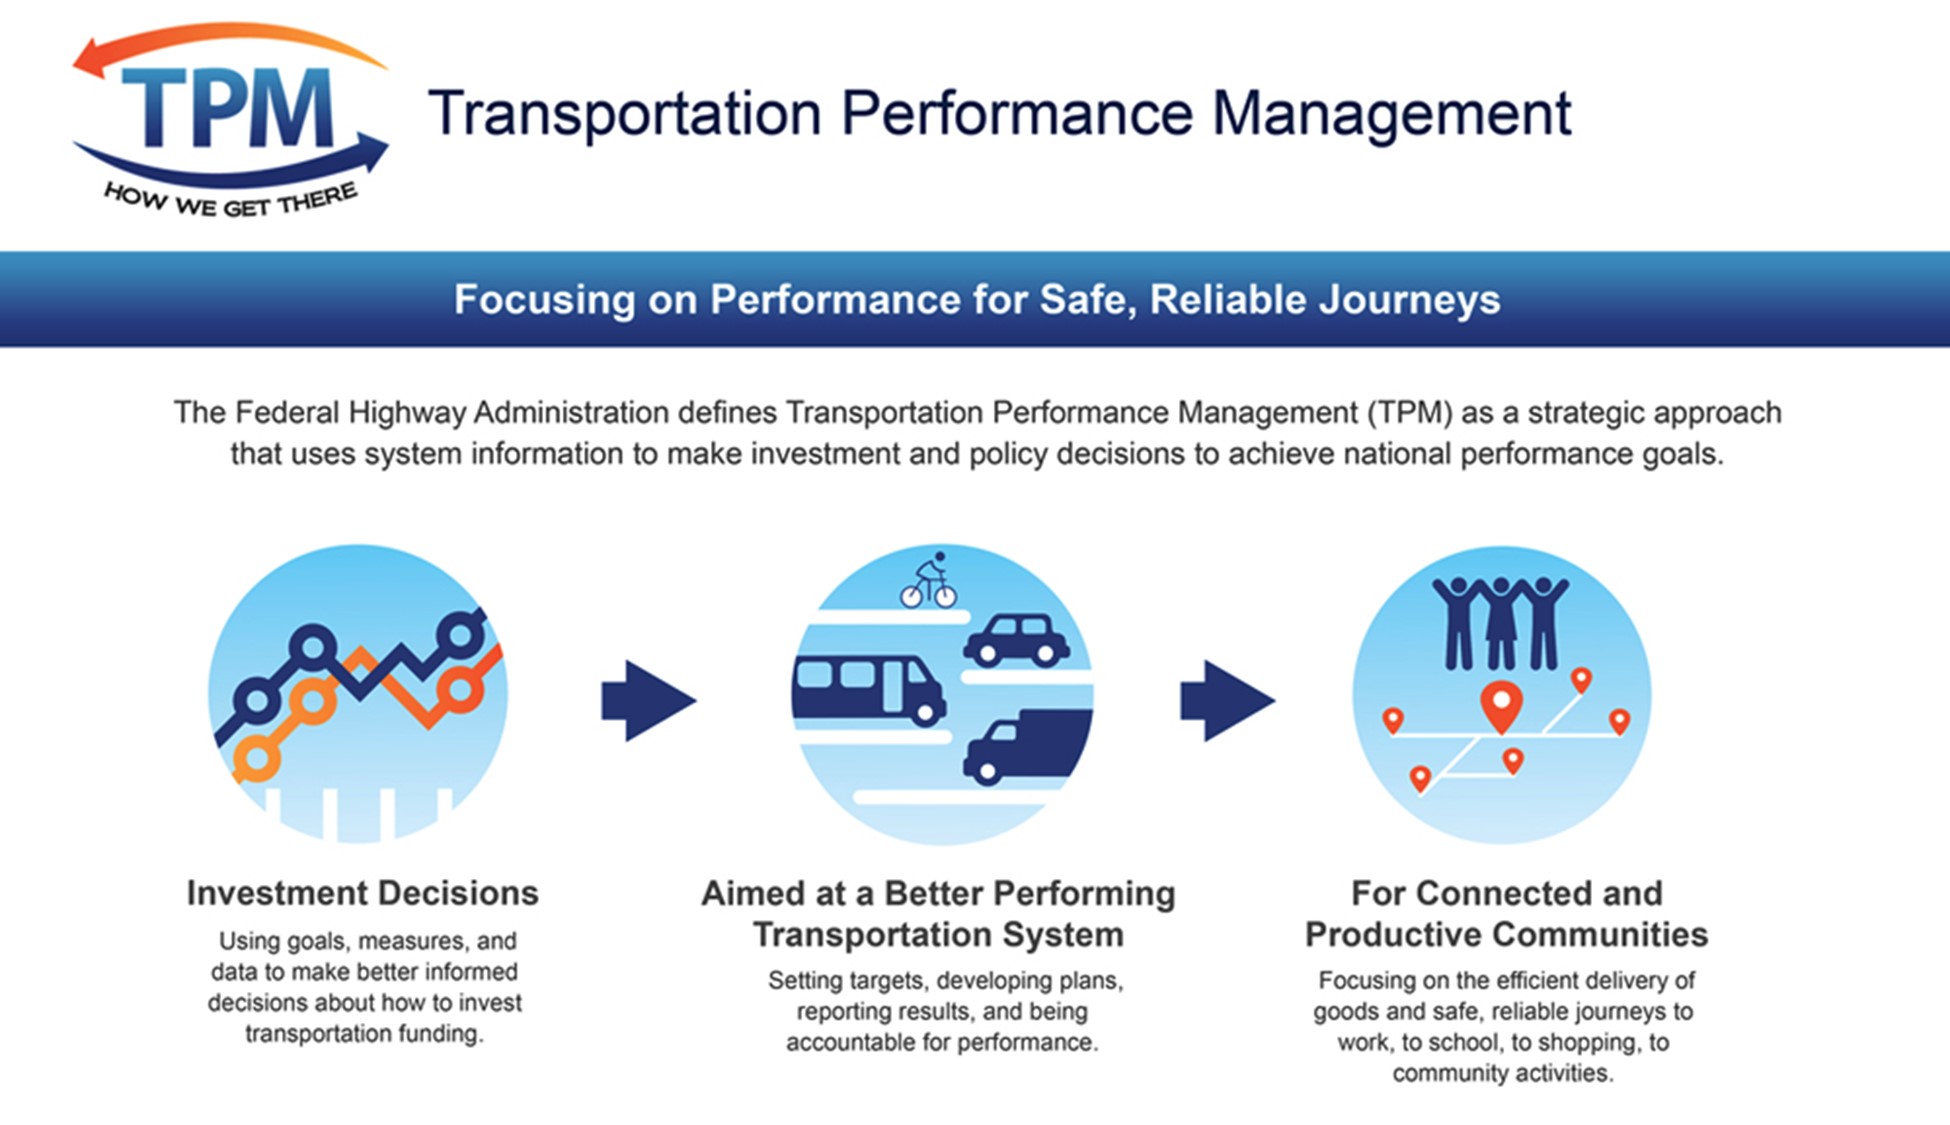 An infographic of Transportation Performance Management (TPM) overview. The graphic has the heading Focusing on Performance for Safe, Reliable Journeys. There are three icons, the first labeled as Investment Decisions with an arrow pointing to the second icon labeled as Aimed at a Better Performing Transportation System with an arrow pointing to the last icon labeled as For Connected and Productive Communities.